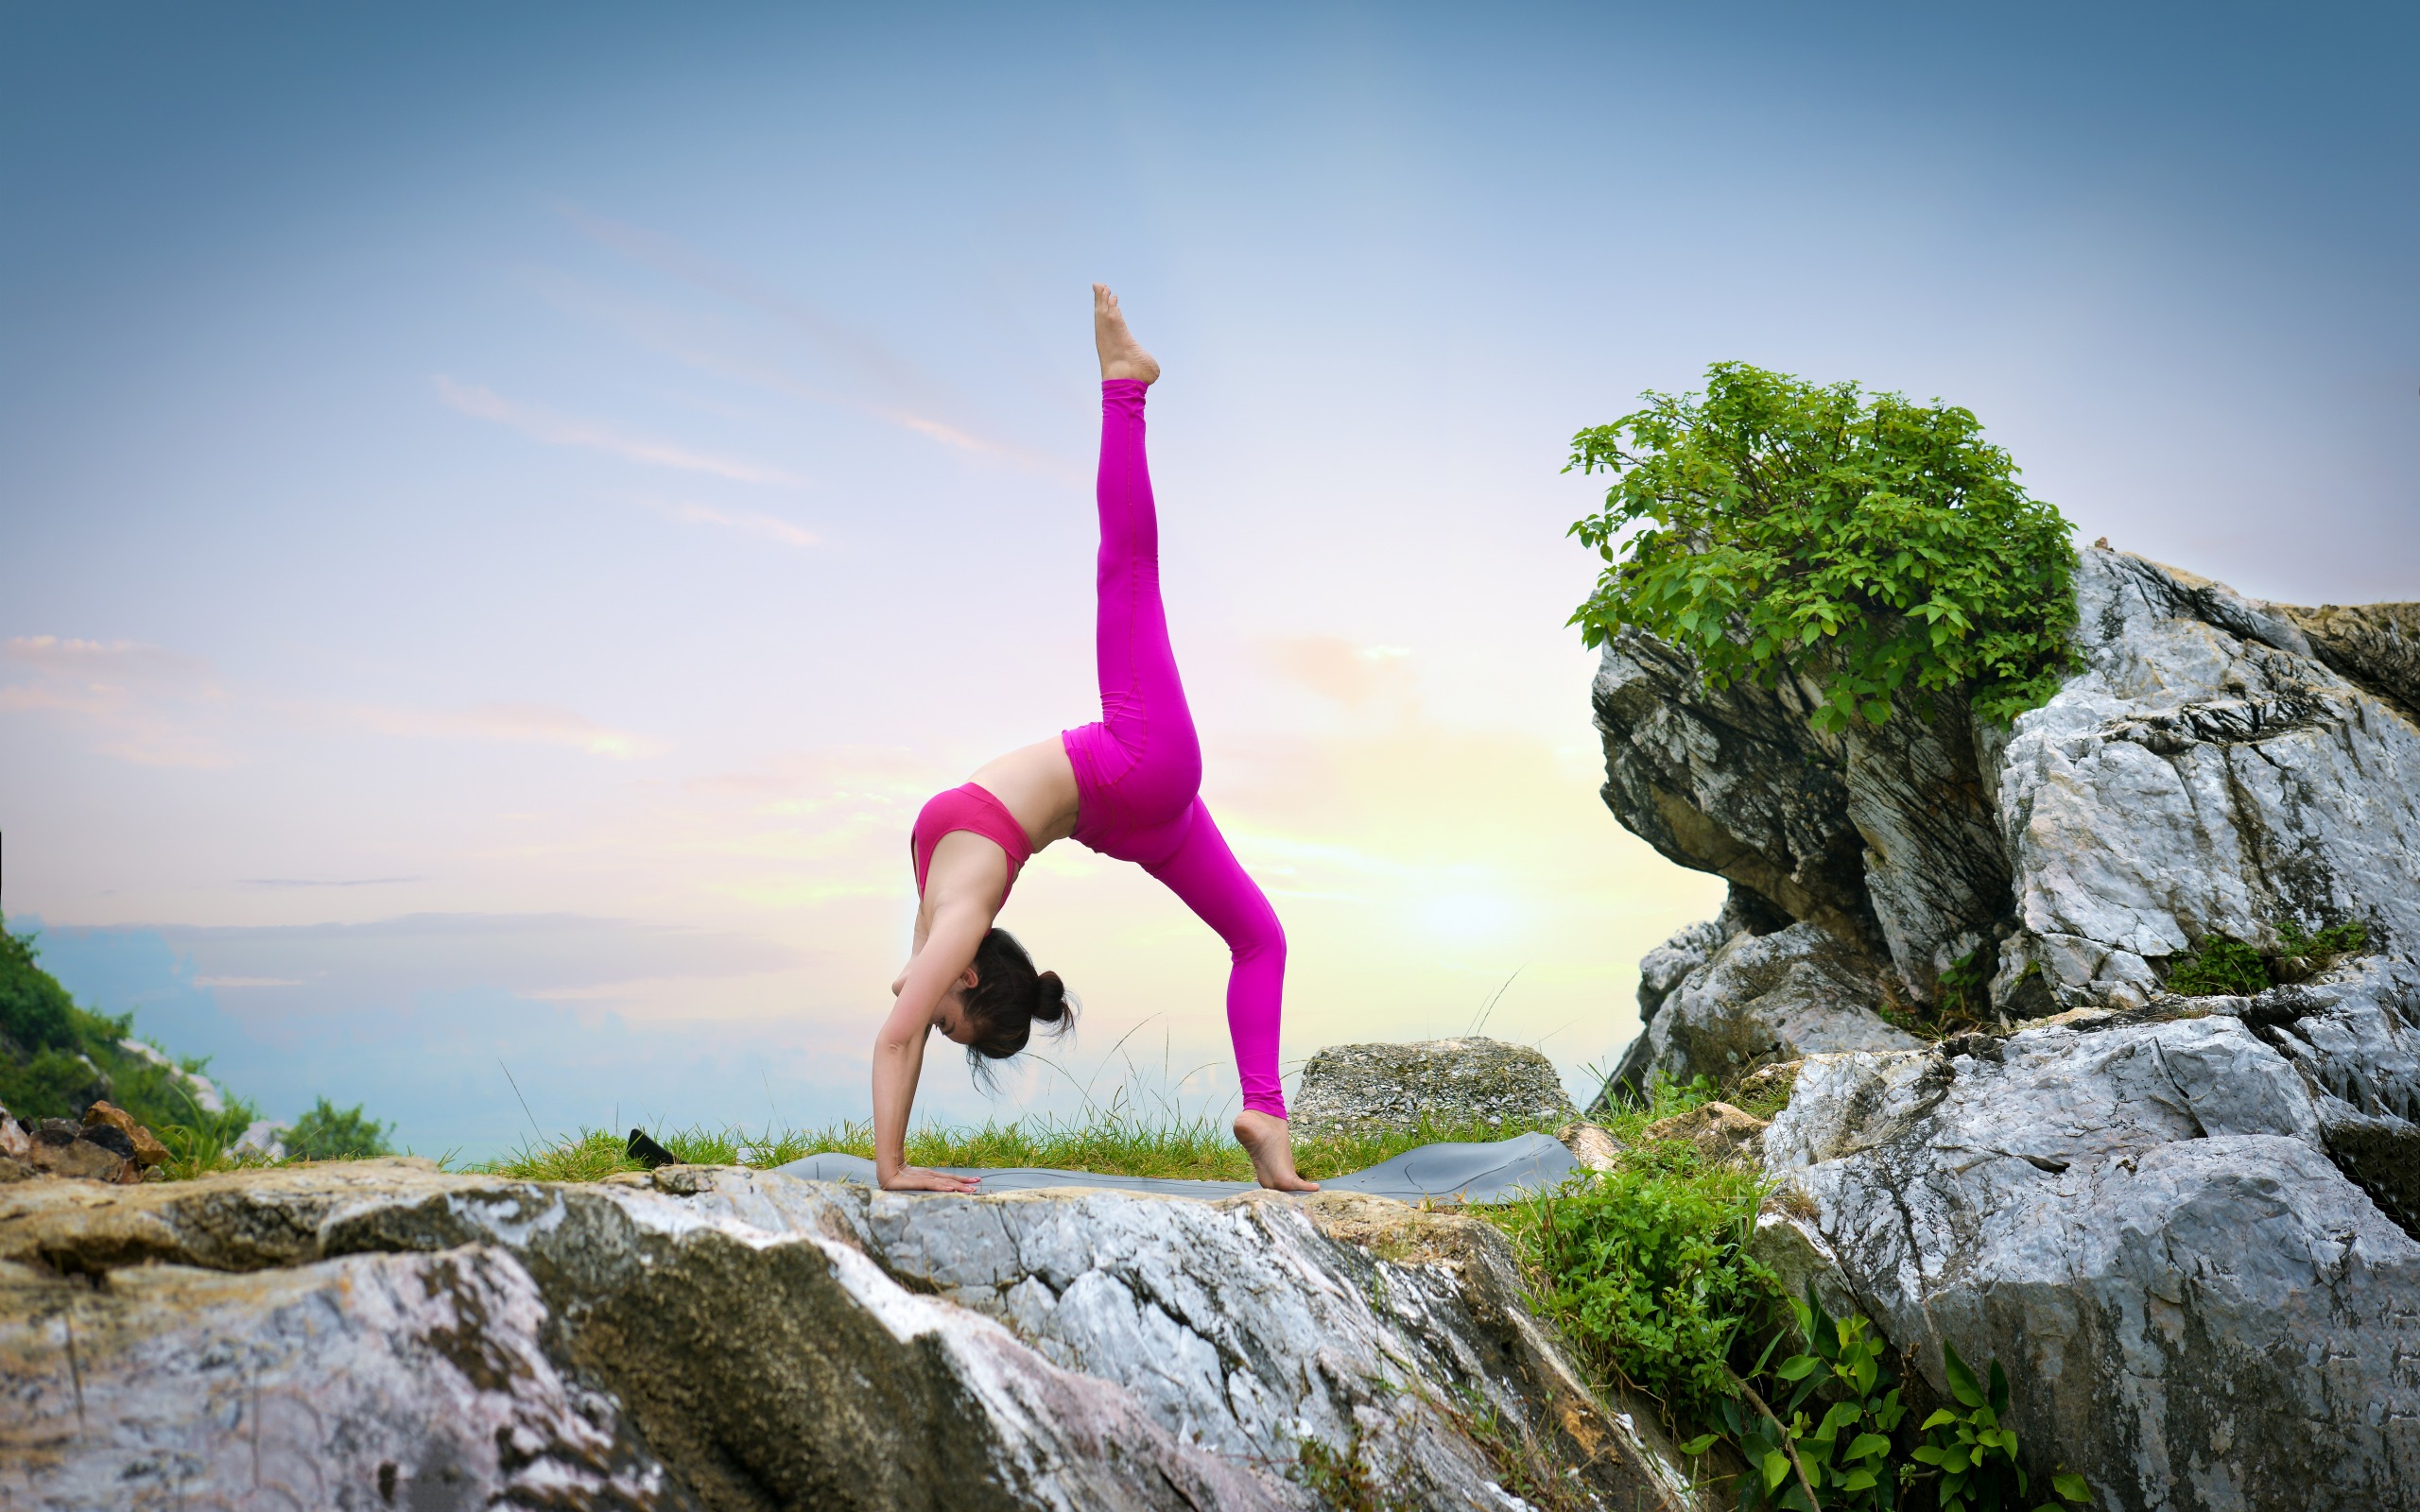 Download wallpaper yoga, woman, sunset, meditation, yoga poses, yoga exercises, health concepts for desktop with resolution 2560x1600. High Quality HD picture wallpaper